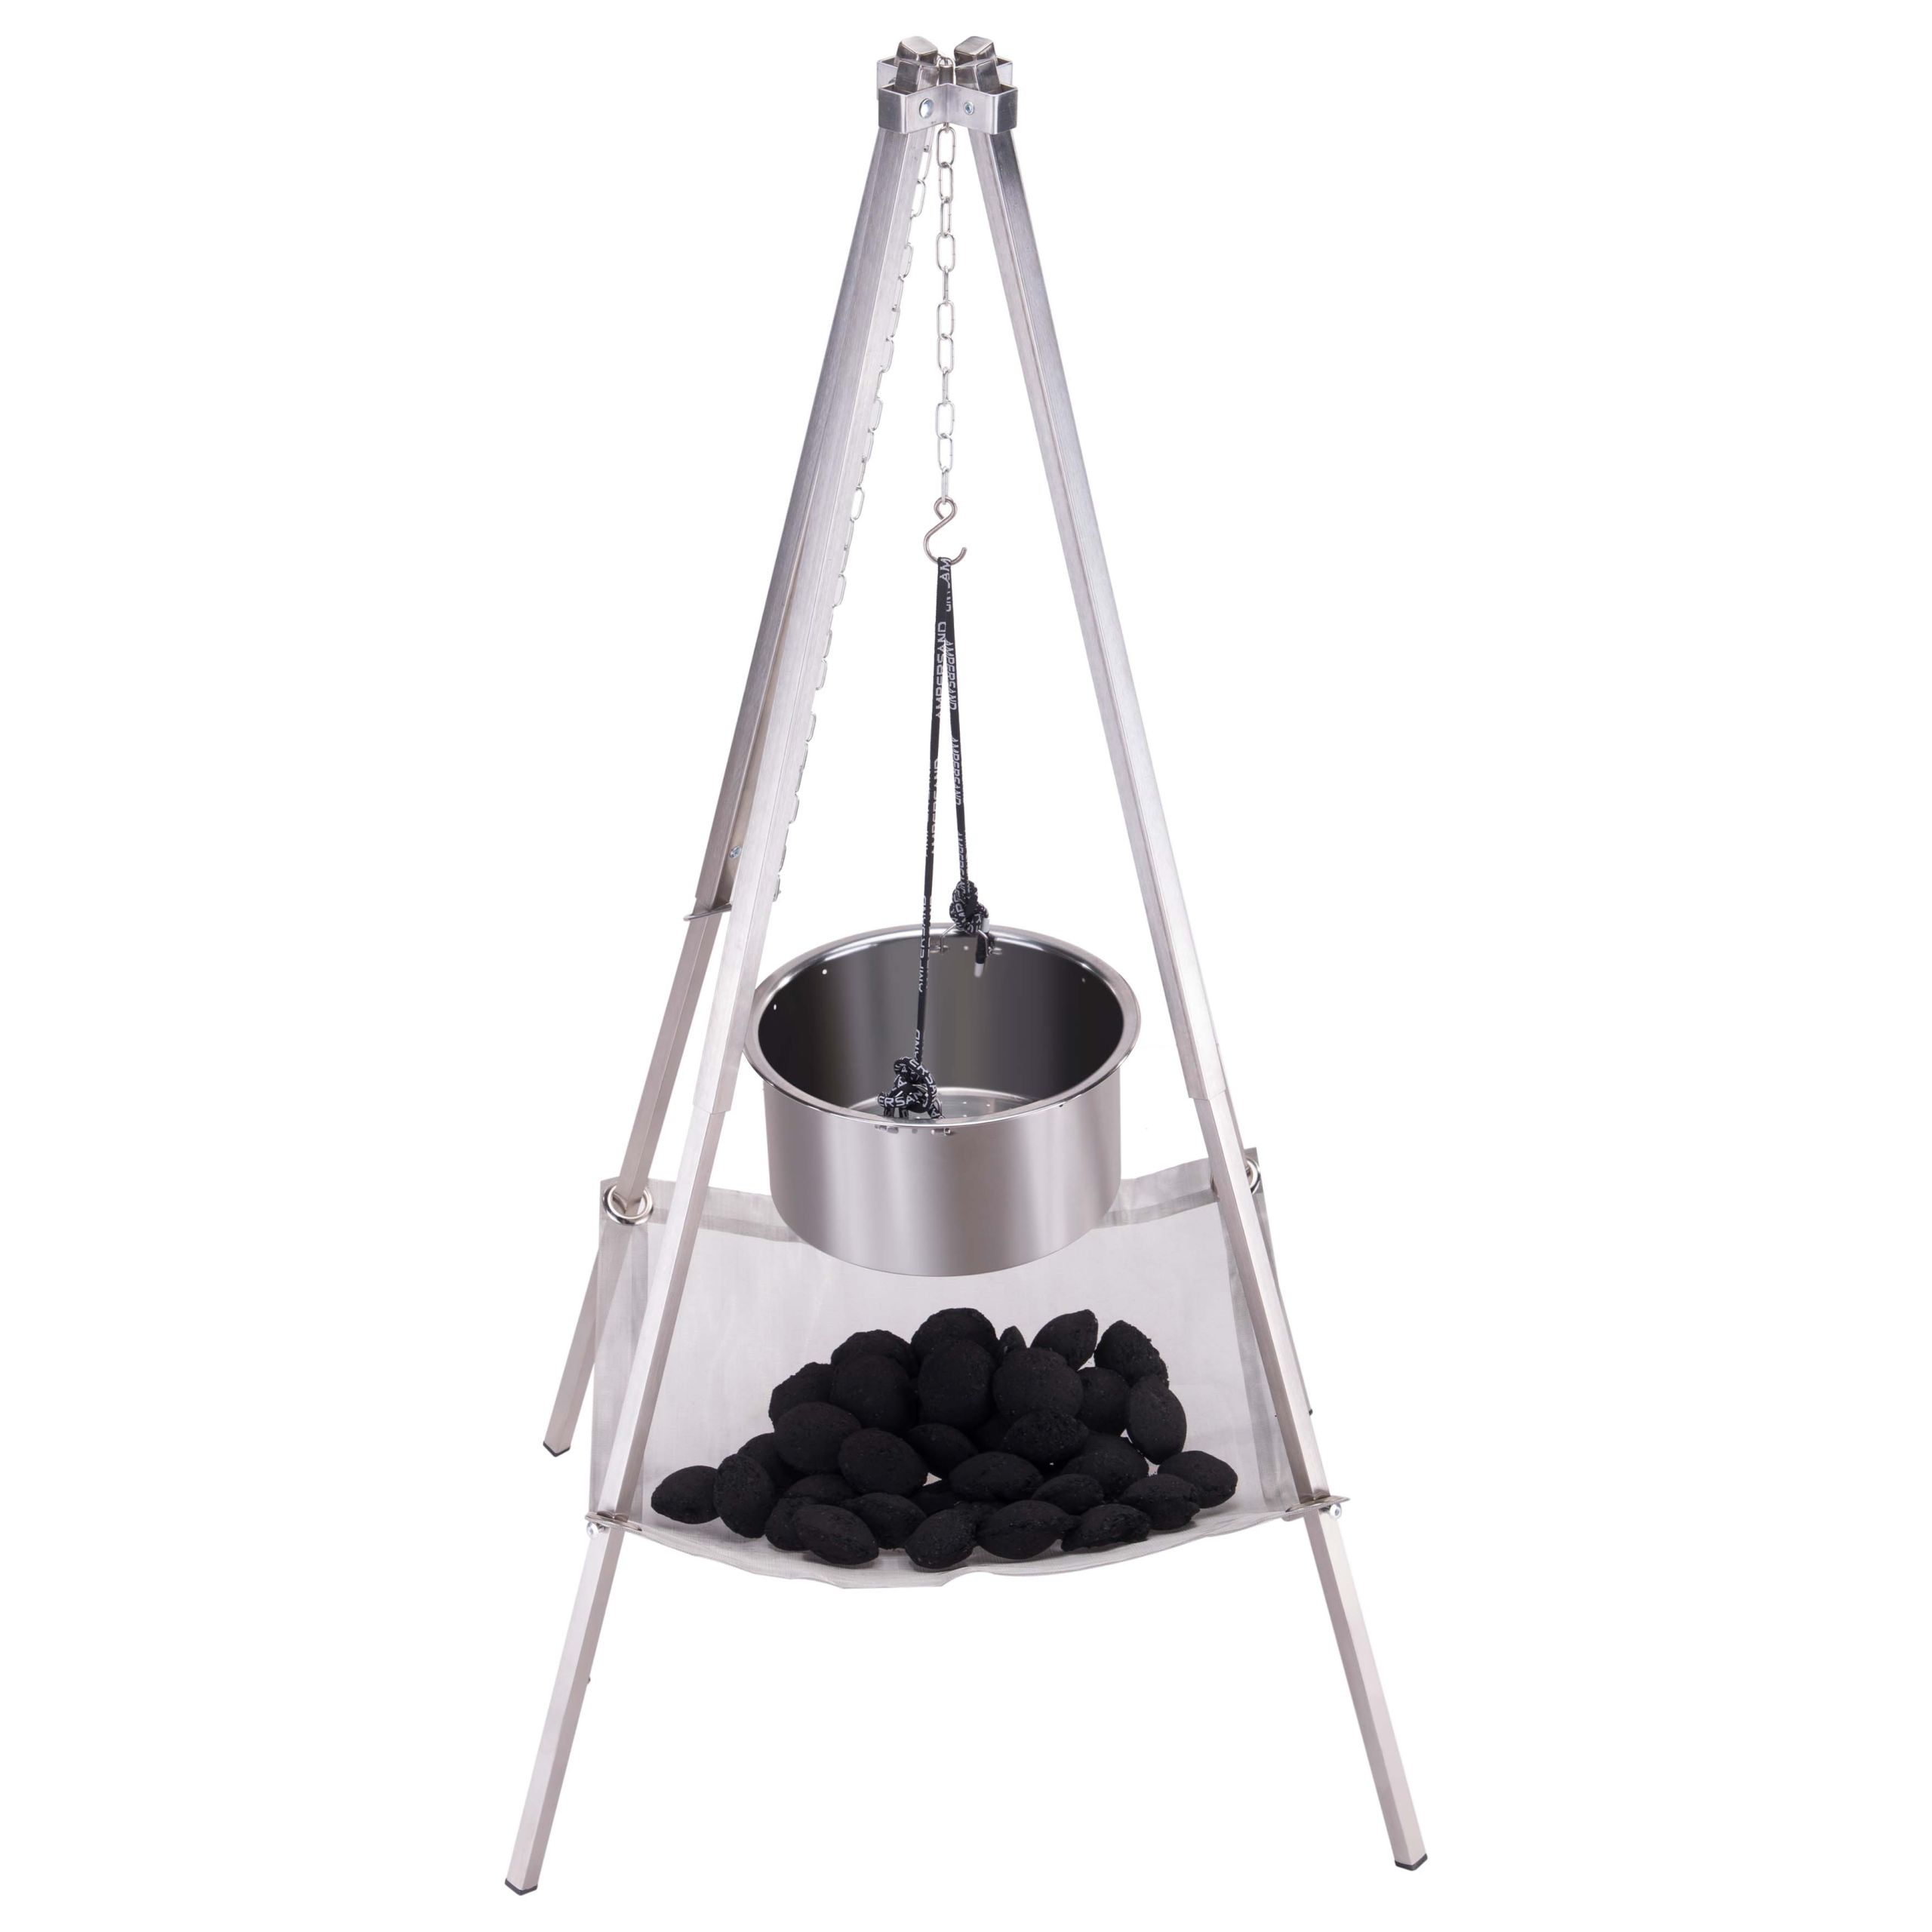 Hanging Grill Outdoor Tripod Chain Round - Grill - 1